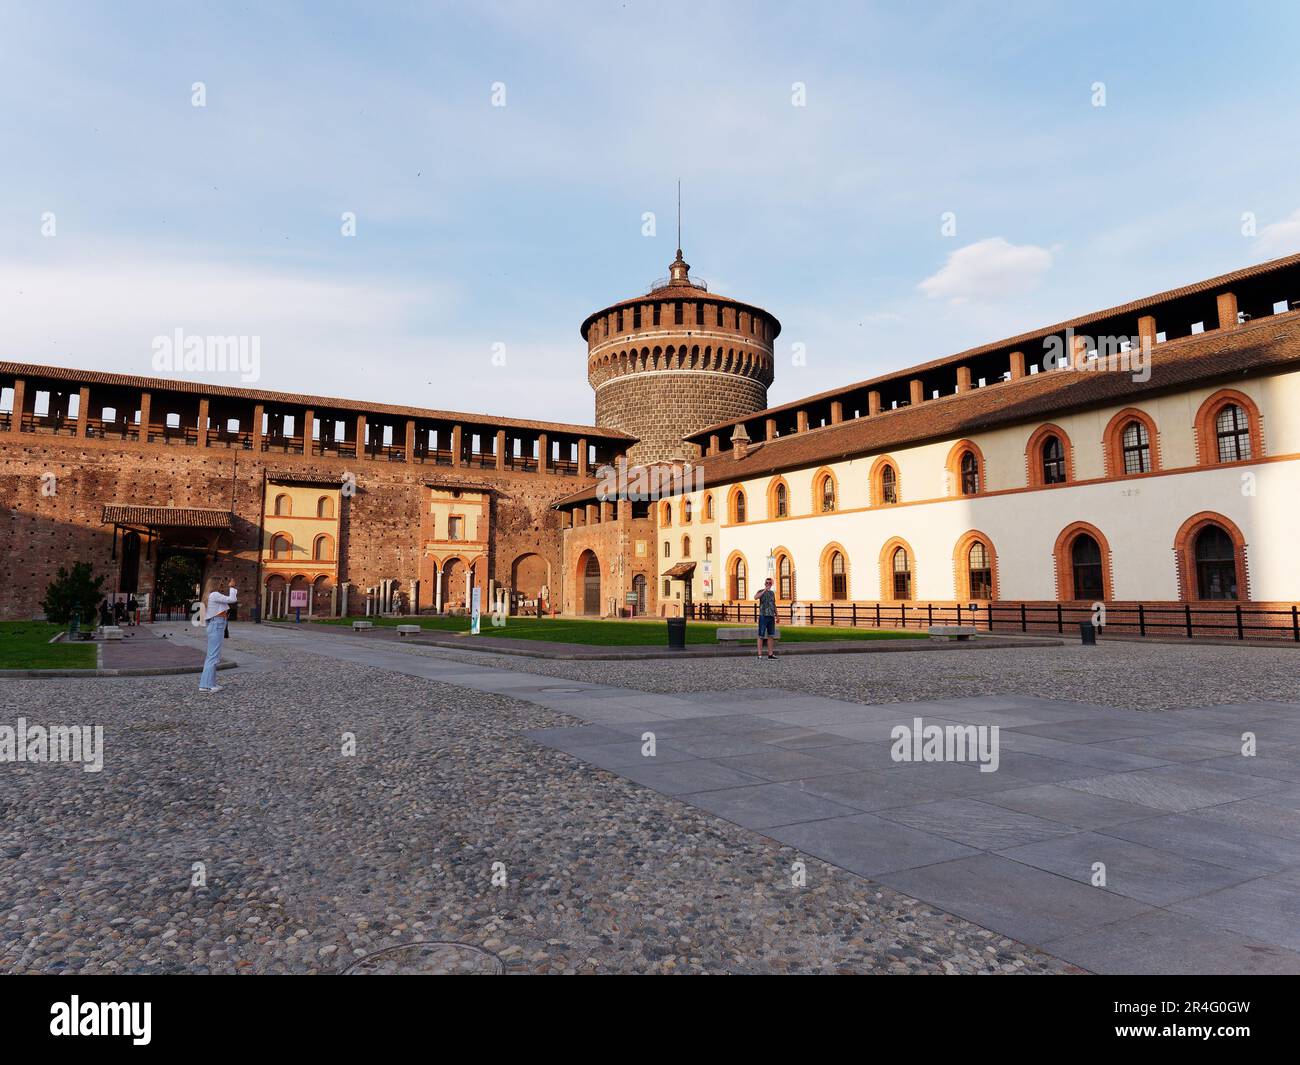 Sforzesco Castle and courtyard with tourists sightseeing in the City of Milan, Lombardy, Italy Stock Photo